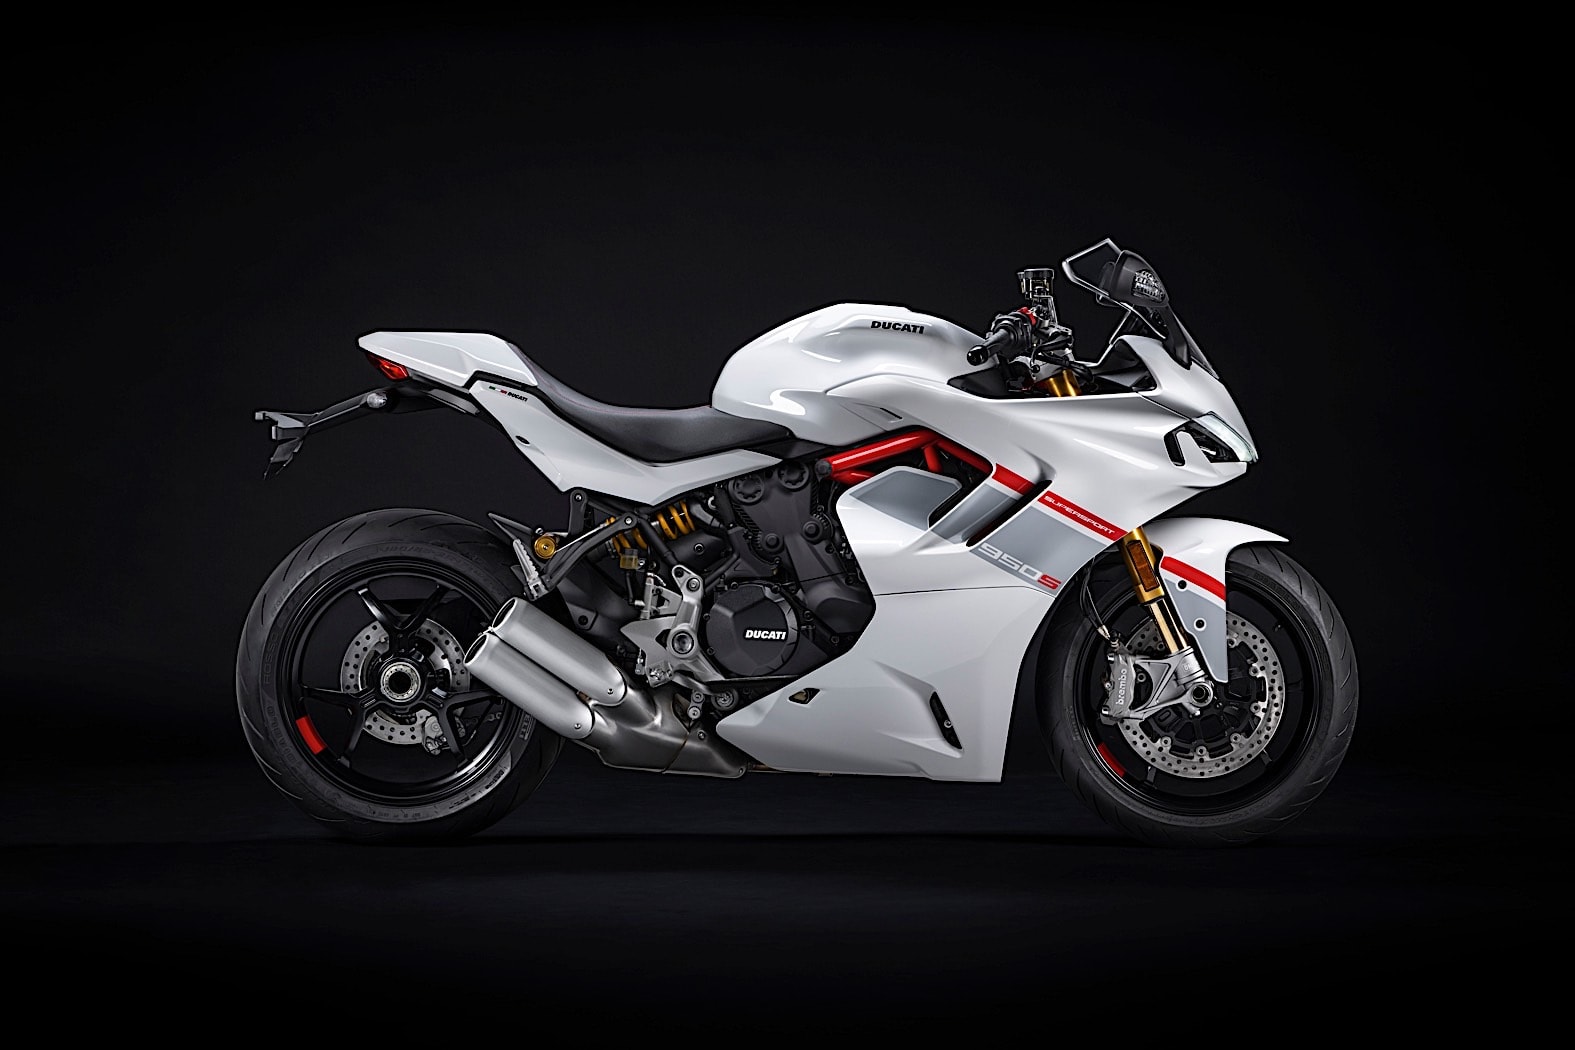 Ducati SuperSport 950 S Breaks Cover in Stripe Livery to Make Sure It's